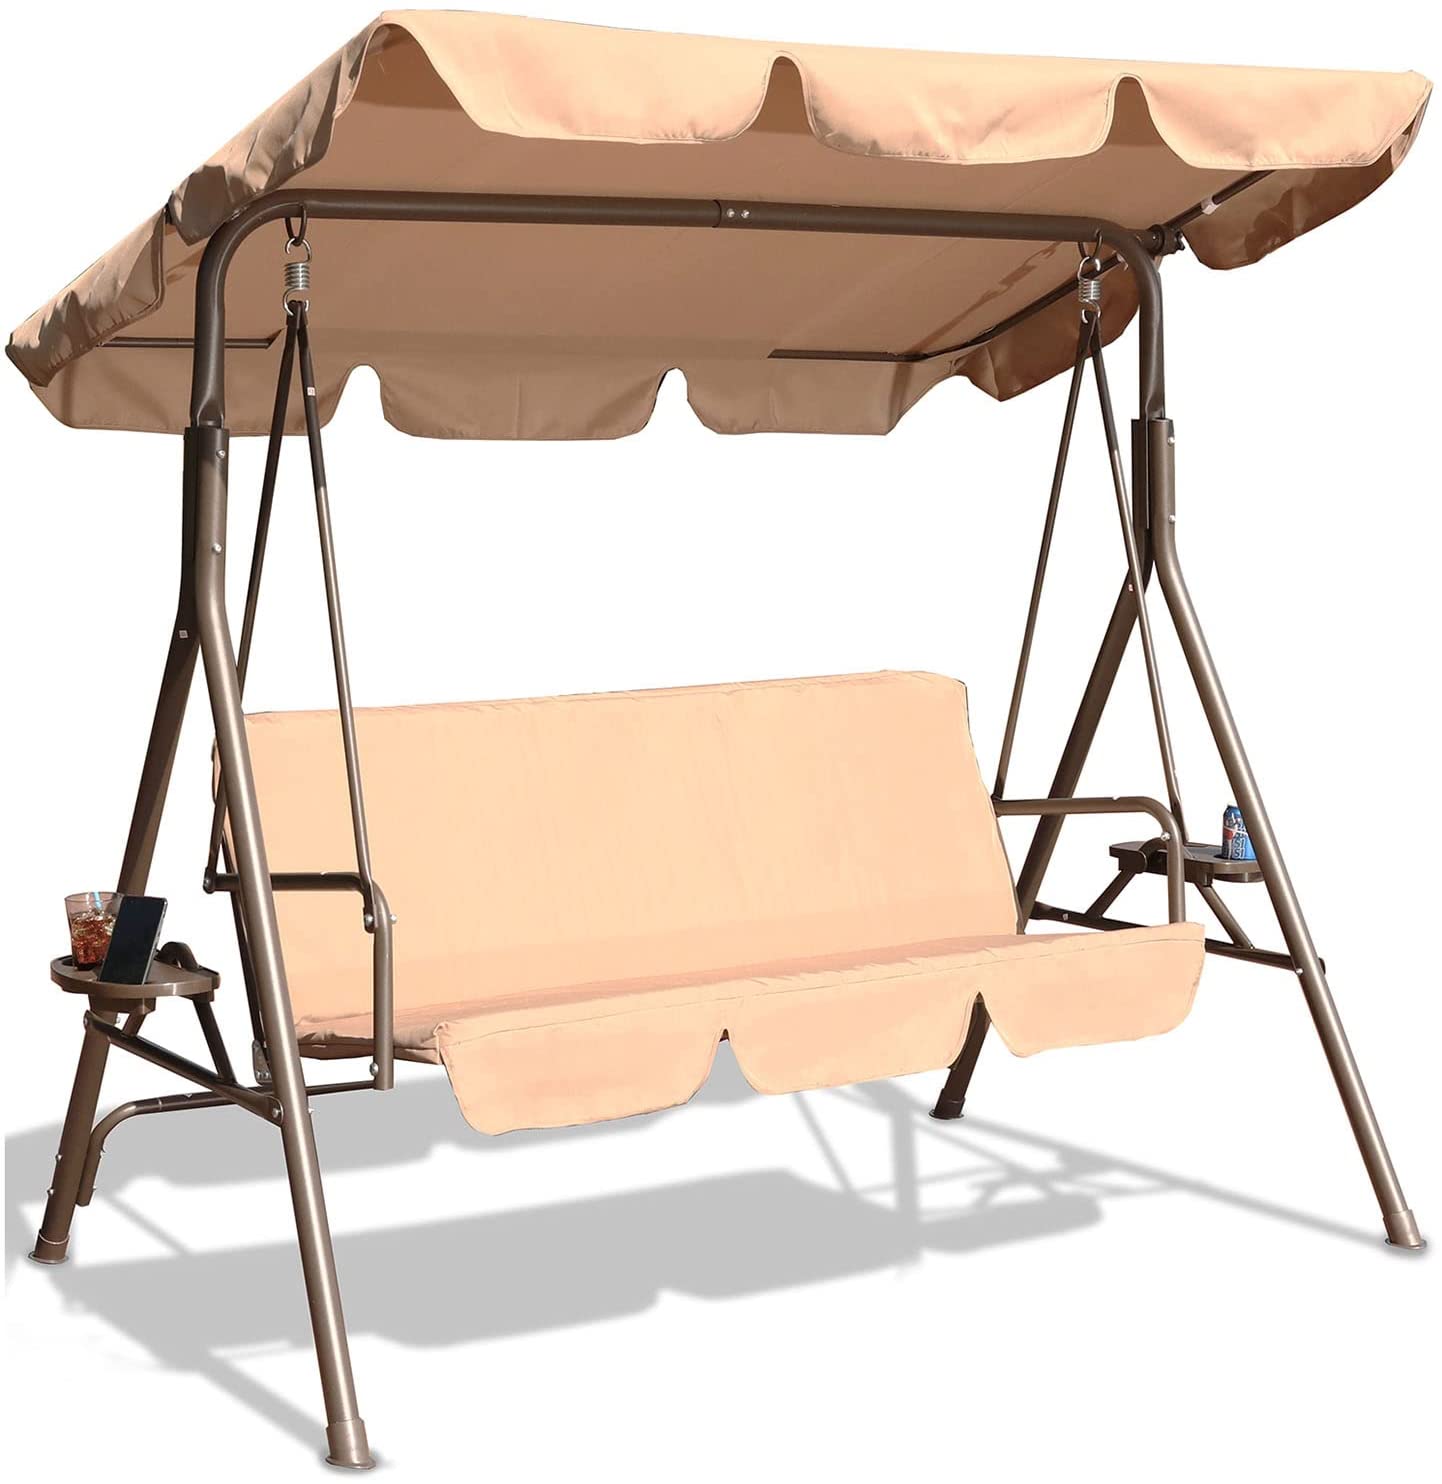 Swing Canopy Cover Chair cover Outdoor Swing Tent cover Waterproof Sunscreen Canopy KGORGE Store